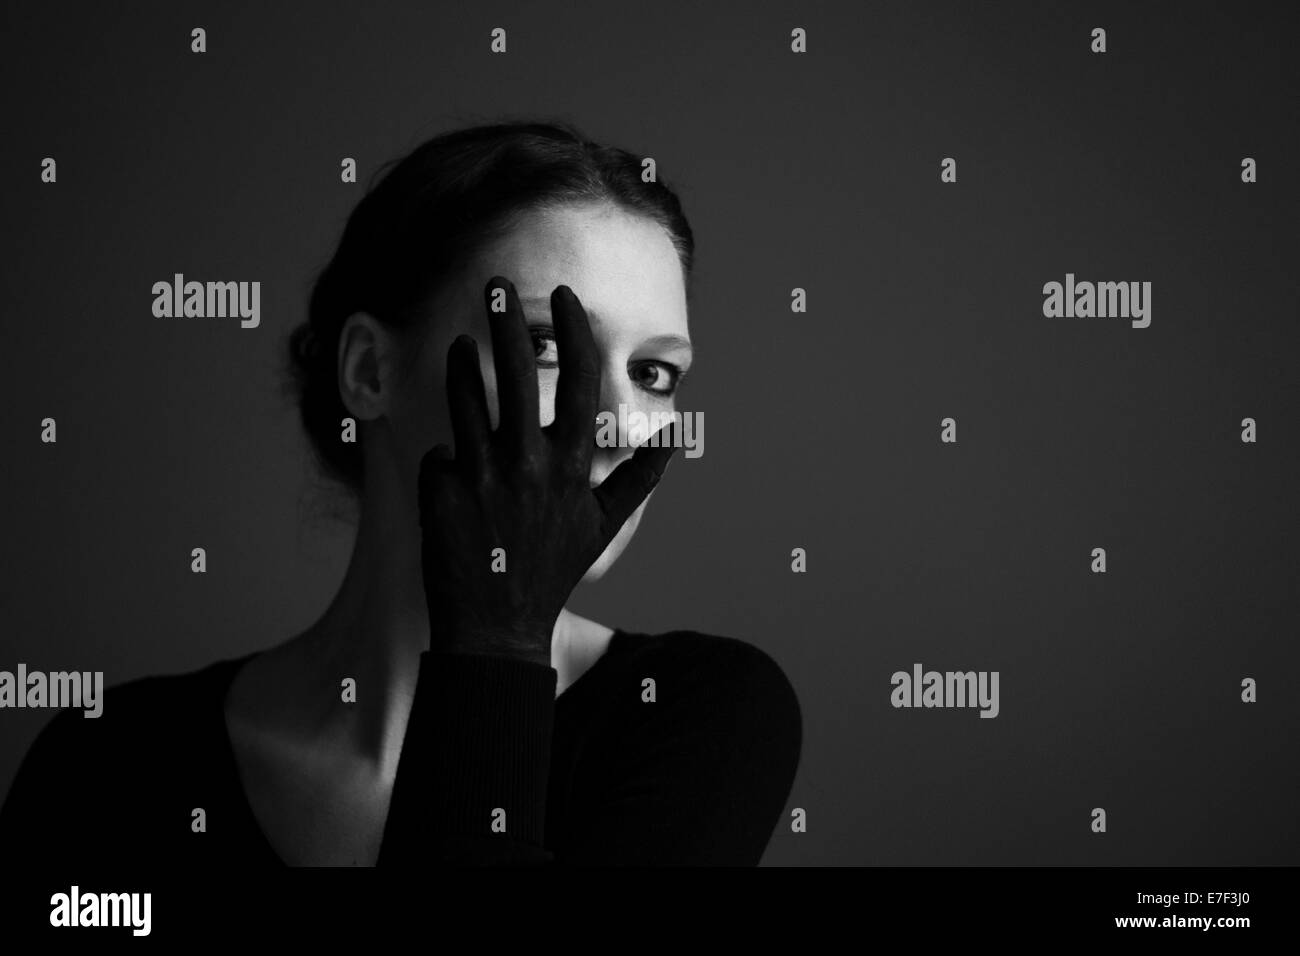 Woman holding her hand with a black glove in front of her face Stock Photo